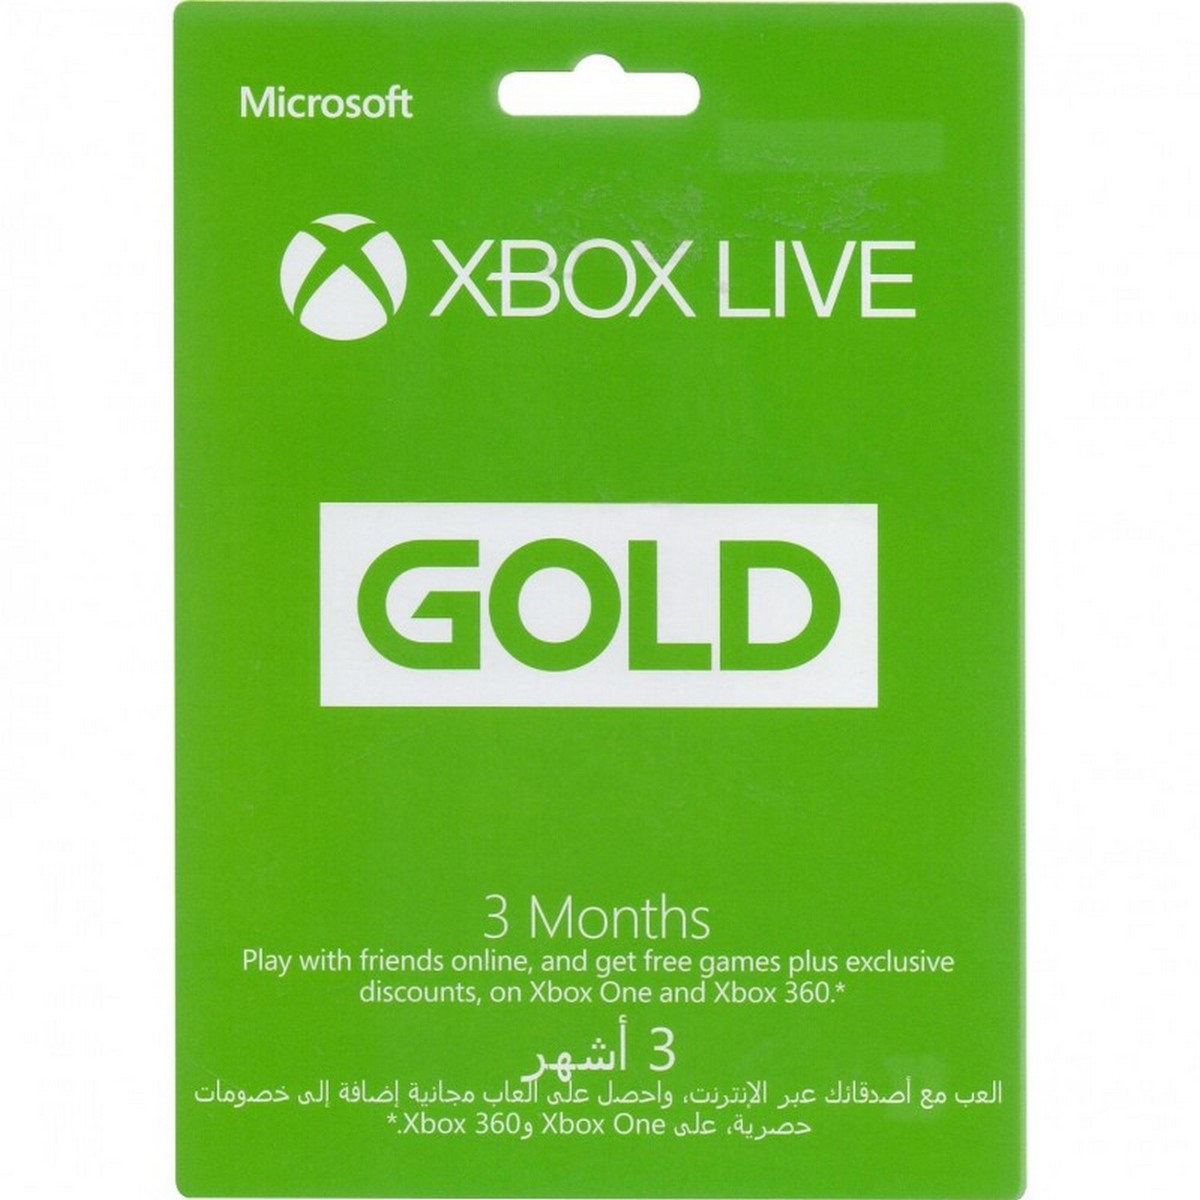 Xbox live Gold Membership Card 3 Months